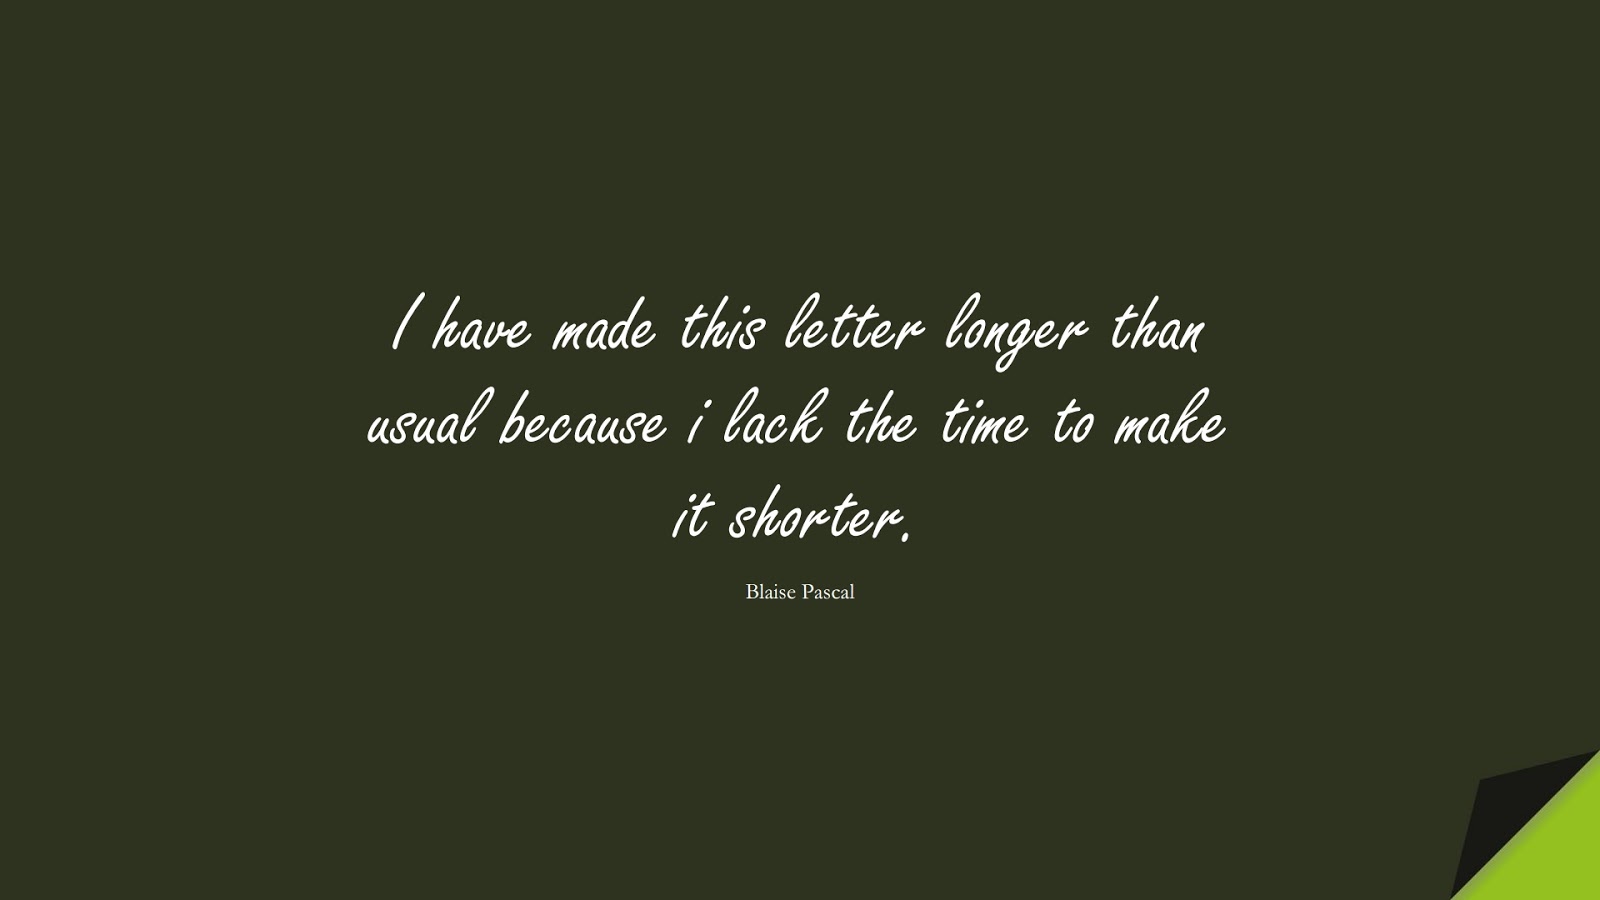 I have made this letter longer than usual because i lack the time to make it shorter. (Blaise Pascal);  #FamousQuotes